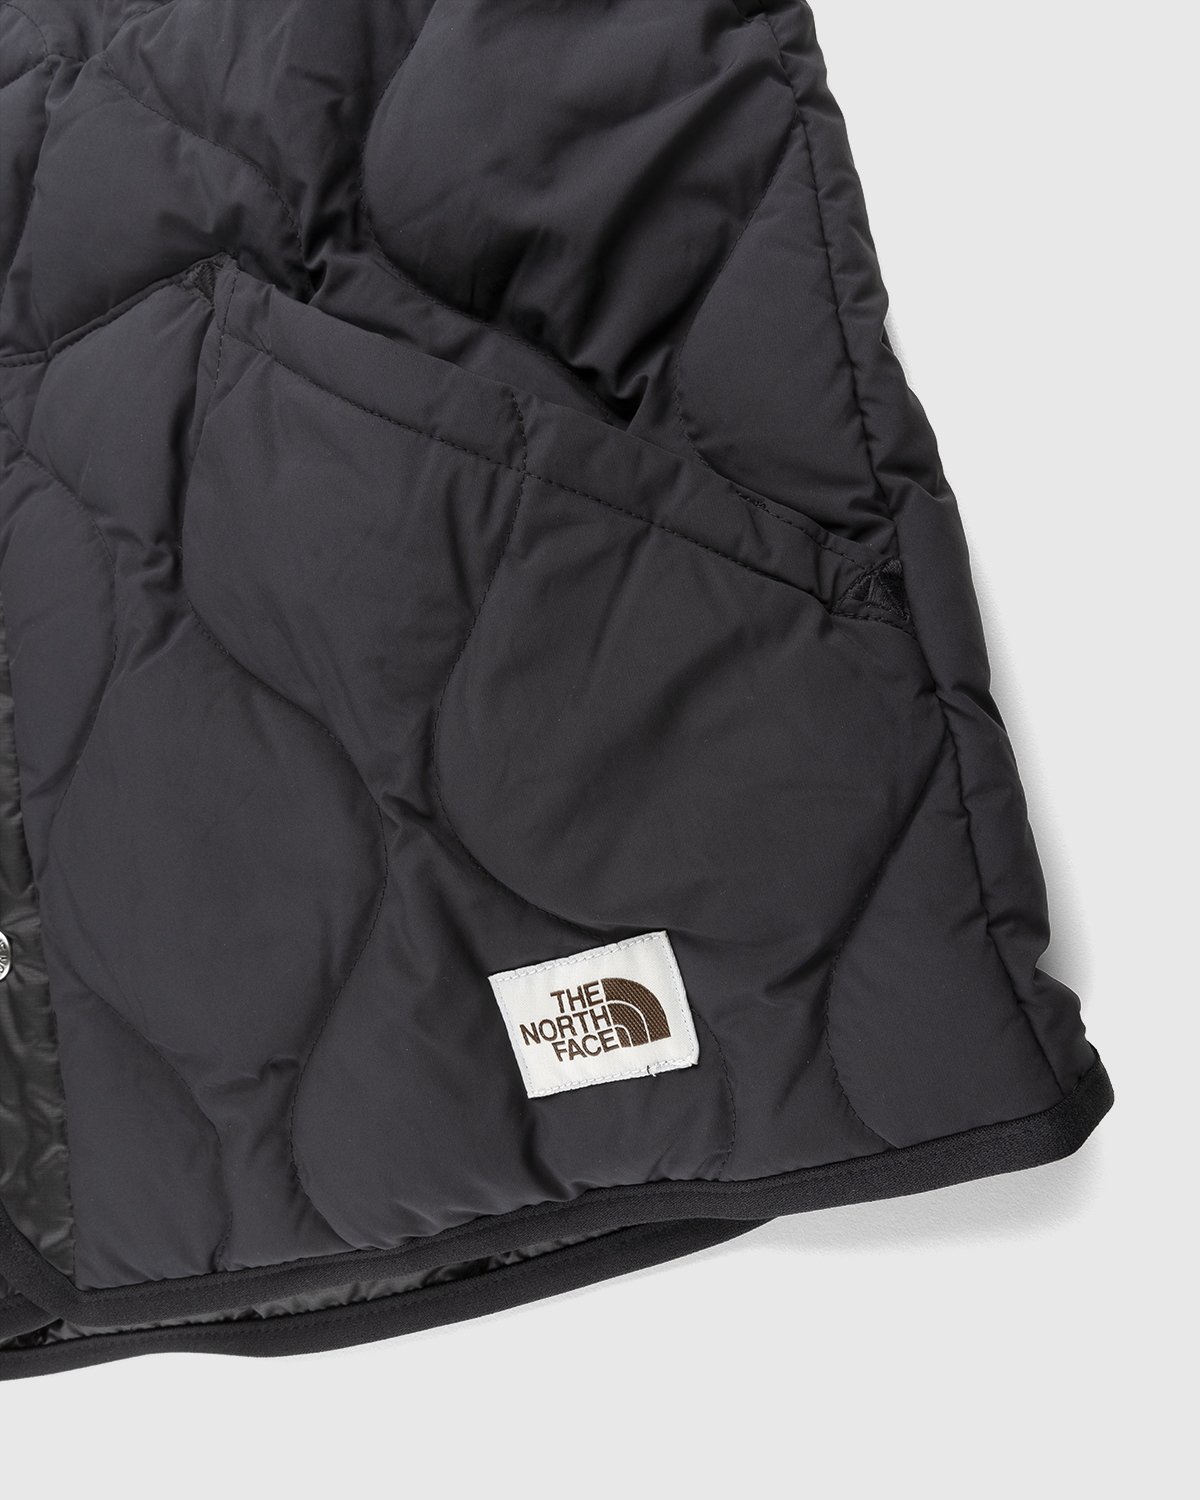 The North Face - M66 Down Jacket Black - Clothing - Black - Image 4